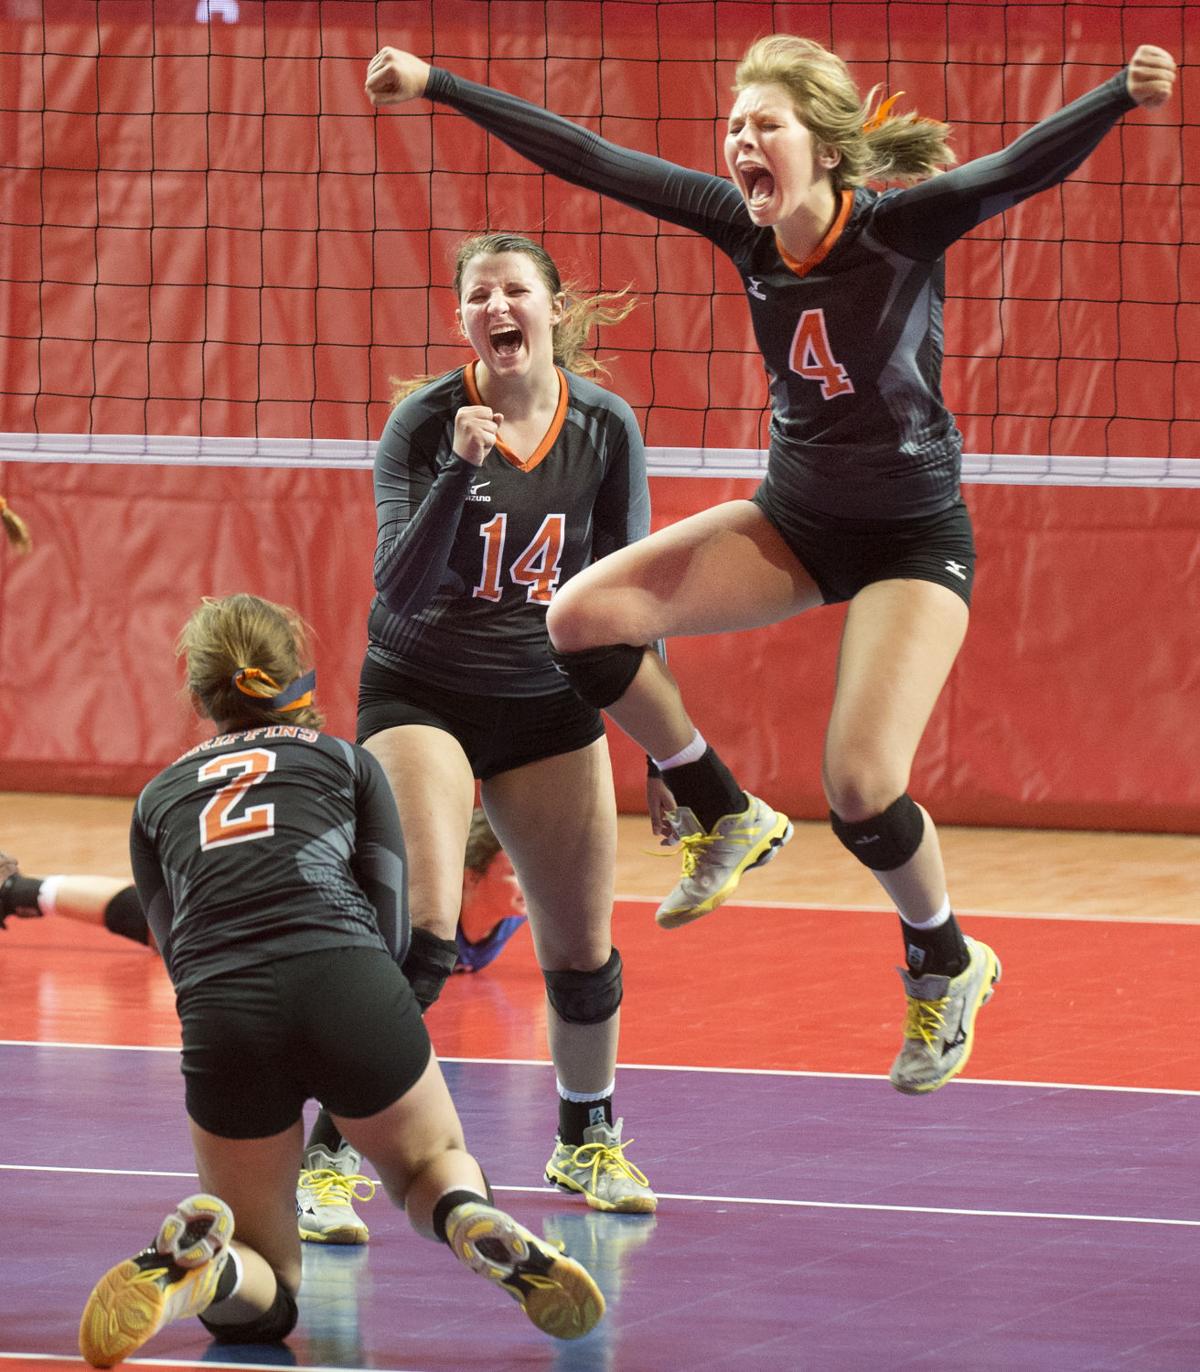 State volleyball will be emotional for Diller-Odell's Jurgens | Ron